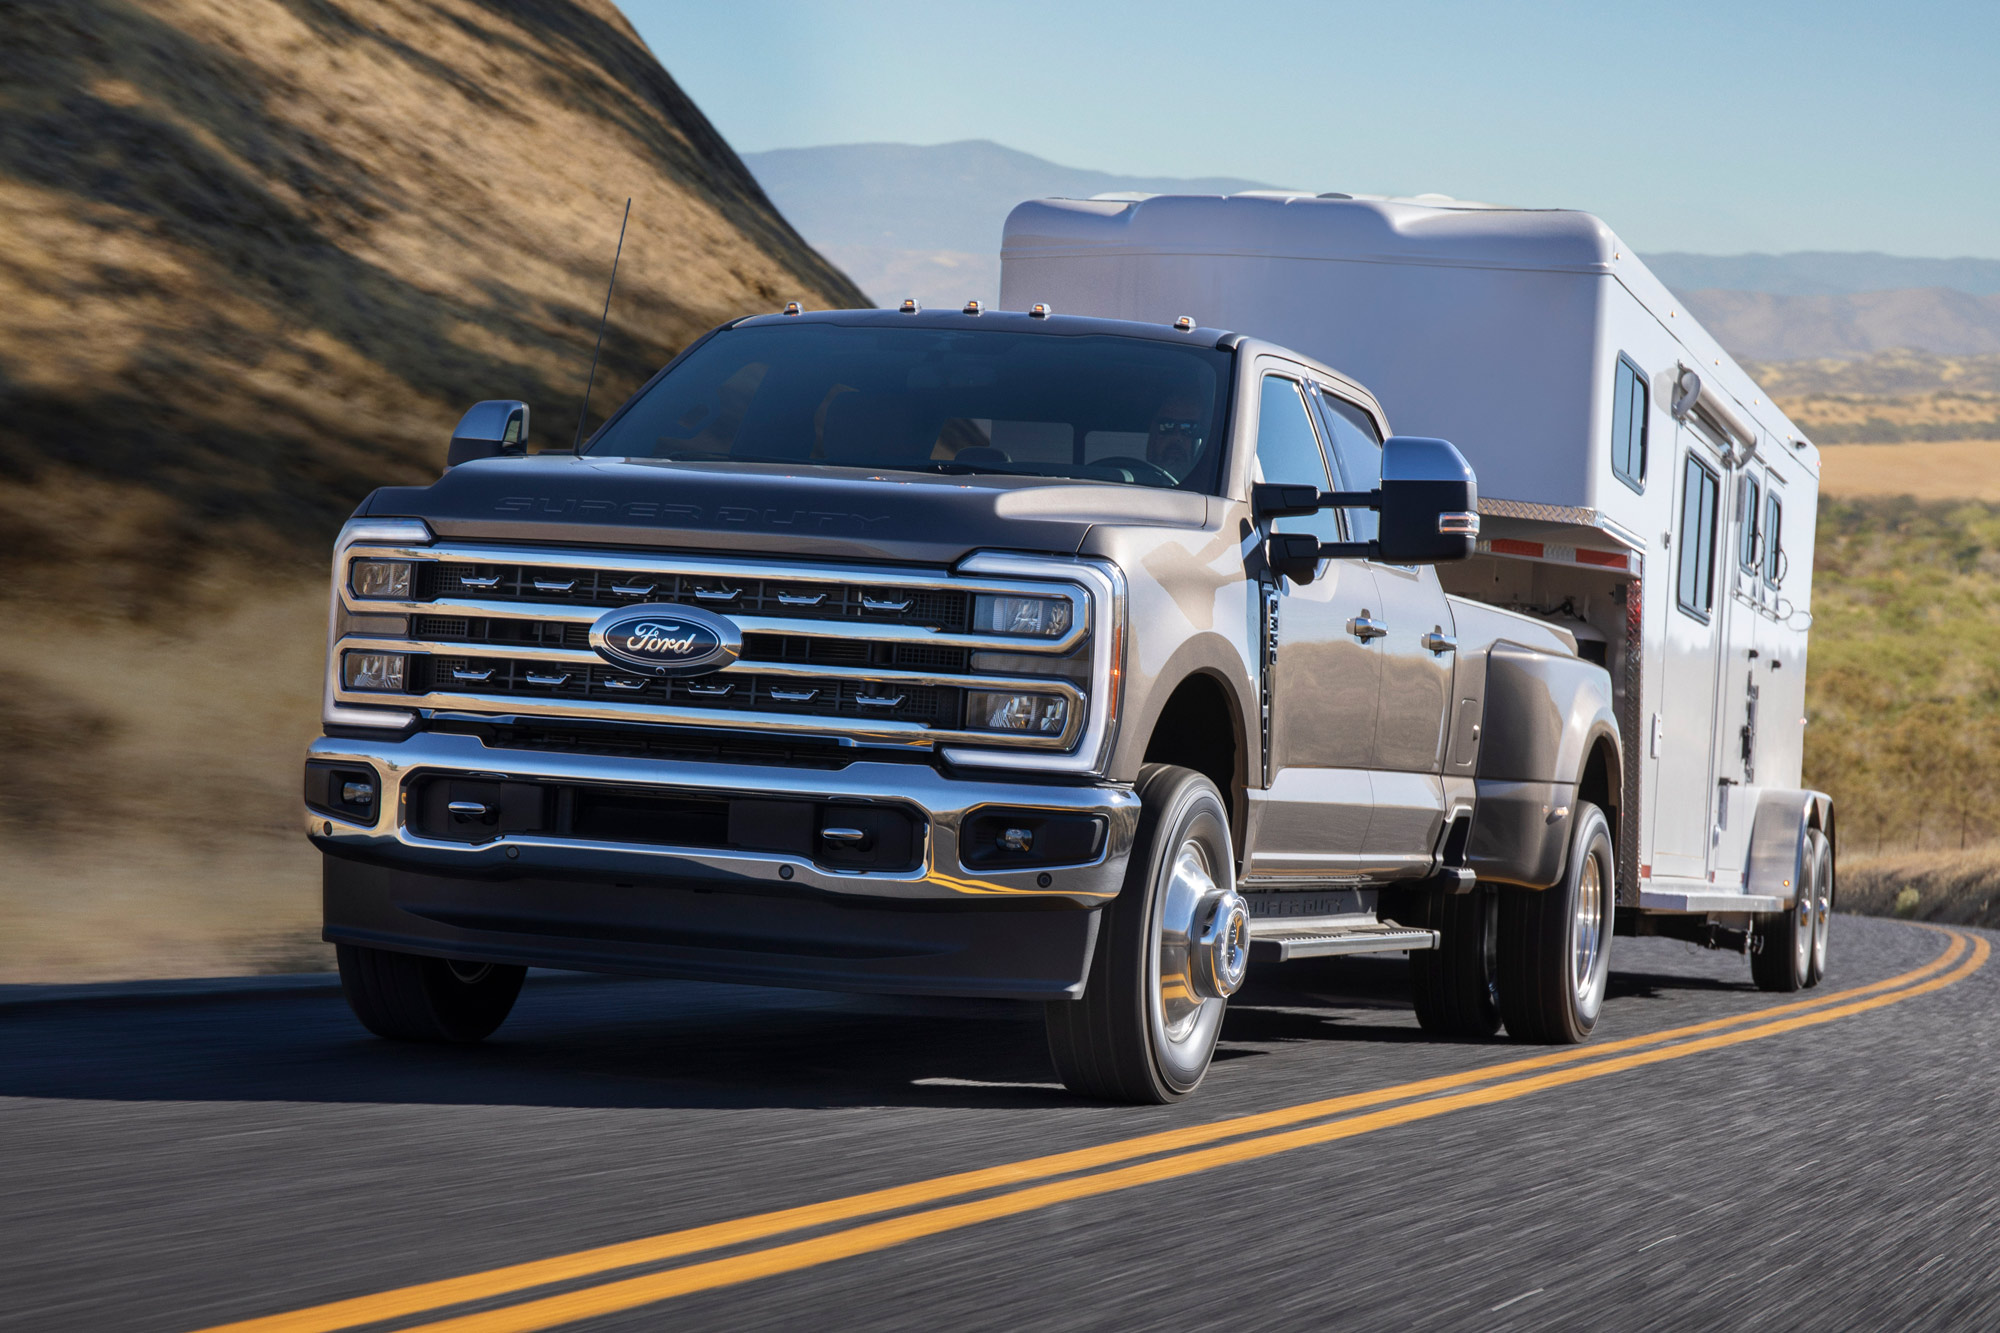 2023 Ford F-350 Super Duty tows a trailer down a highway.